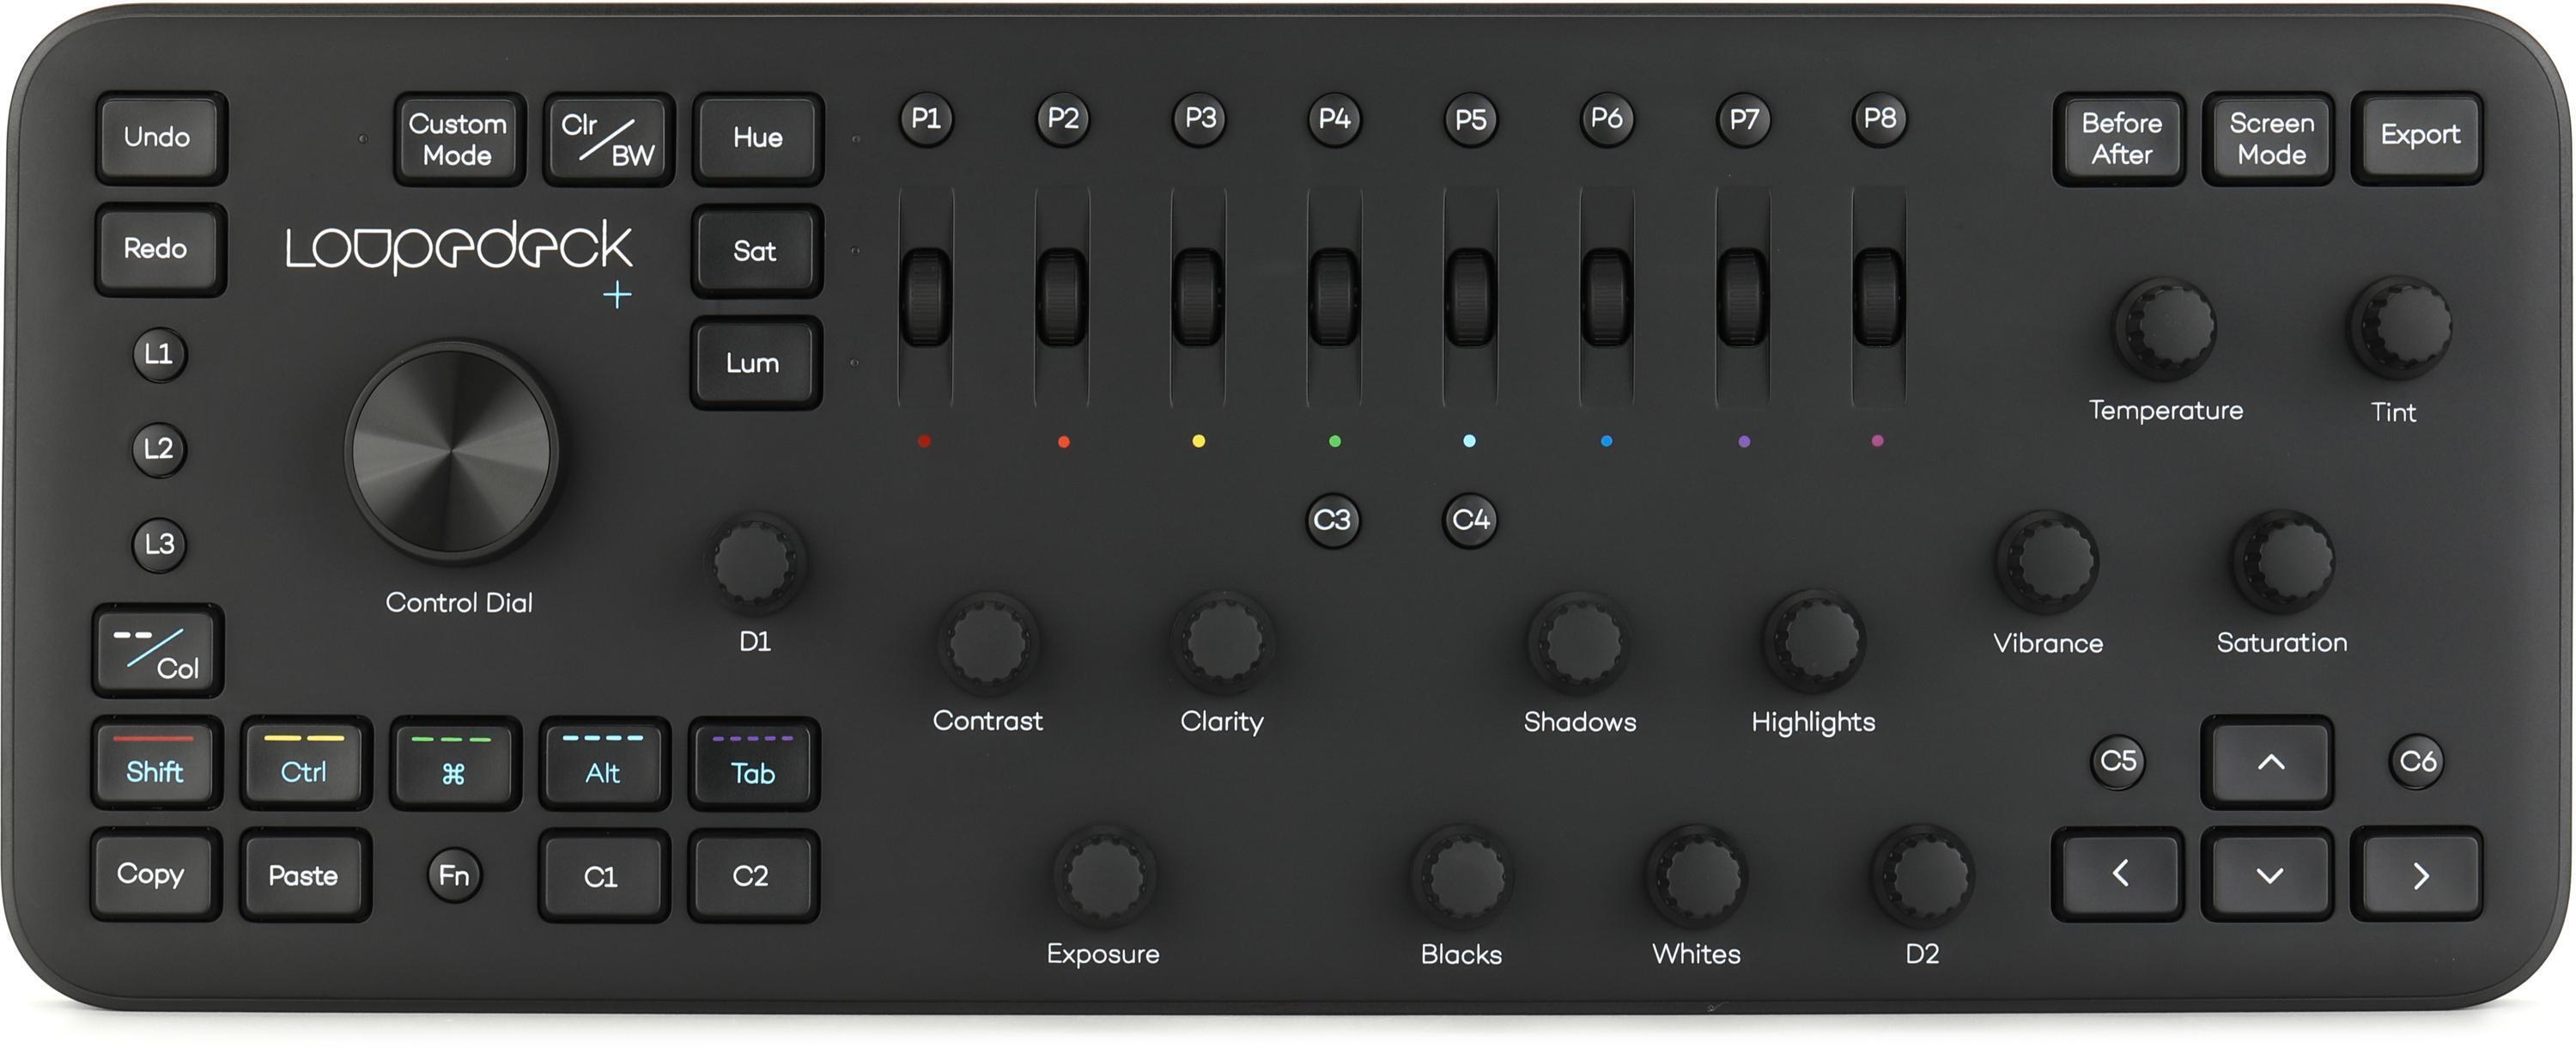 Loupedeck + Review: The video editing console that's easy to set up -  Videomaker